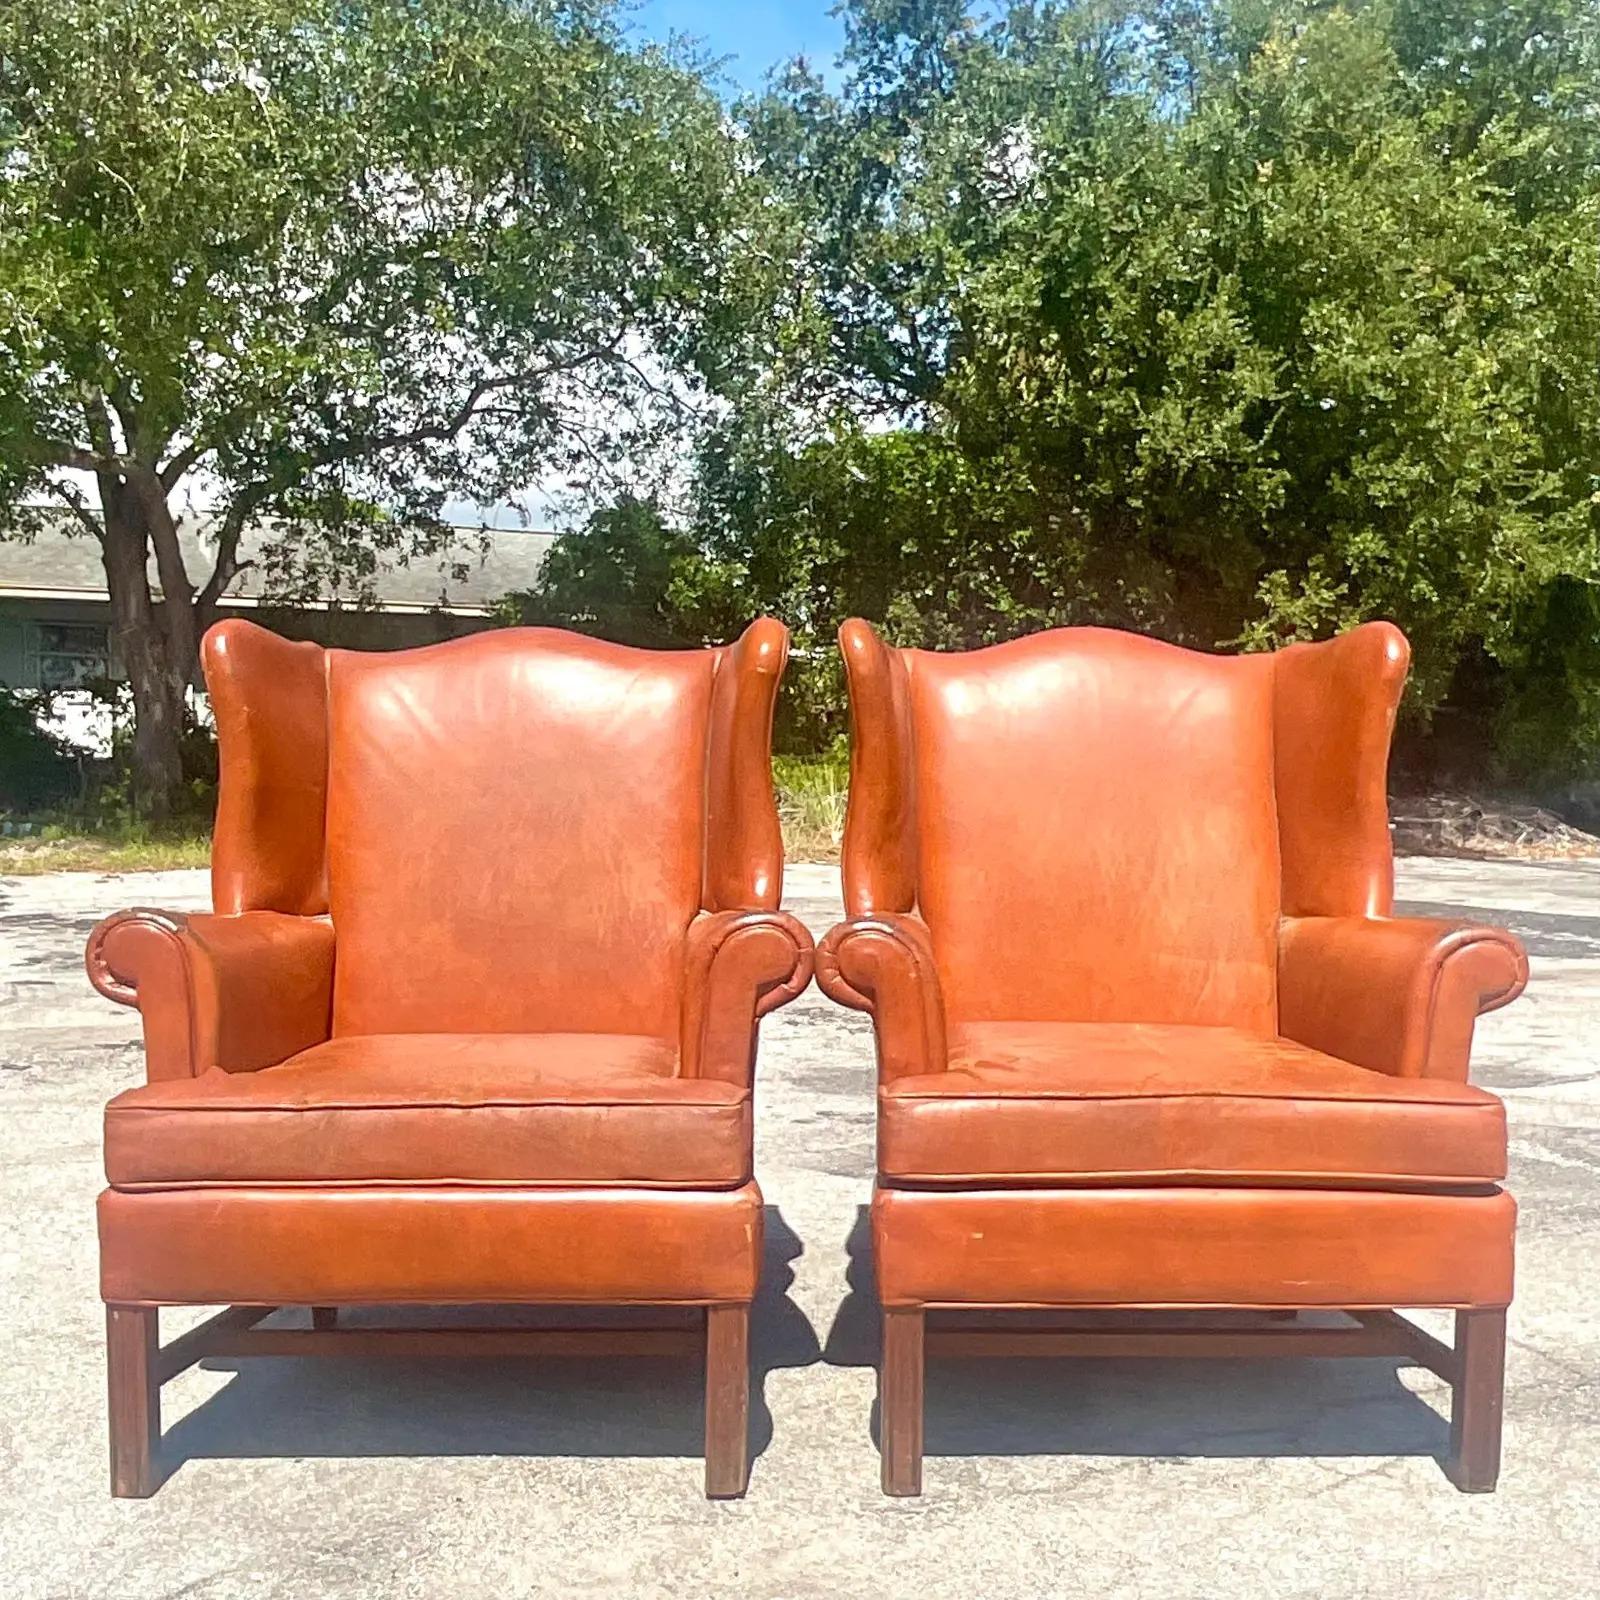 A spectacular pair of vintage Boho wingback chairs. Done in a distressed leather with lots of crackling and tears from time. The perfect amount of patina from time. Super chic. Acquired from a Palm Beach estate.

The chairs are in great vintage